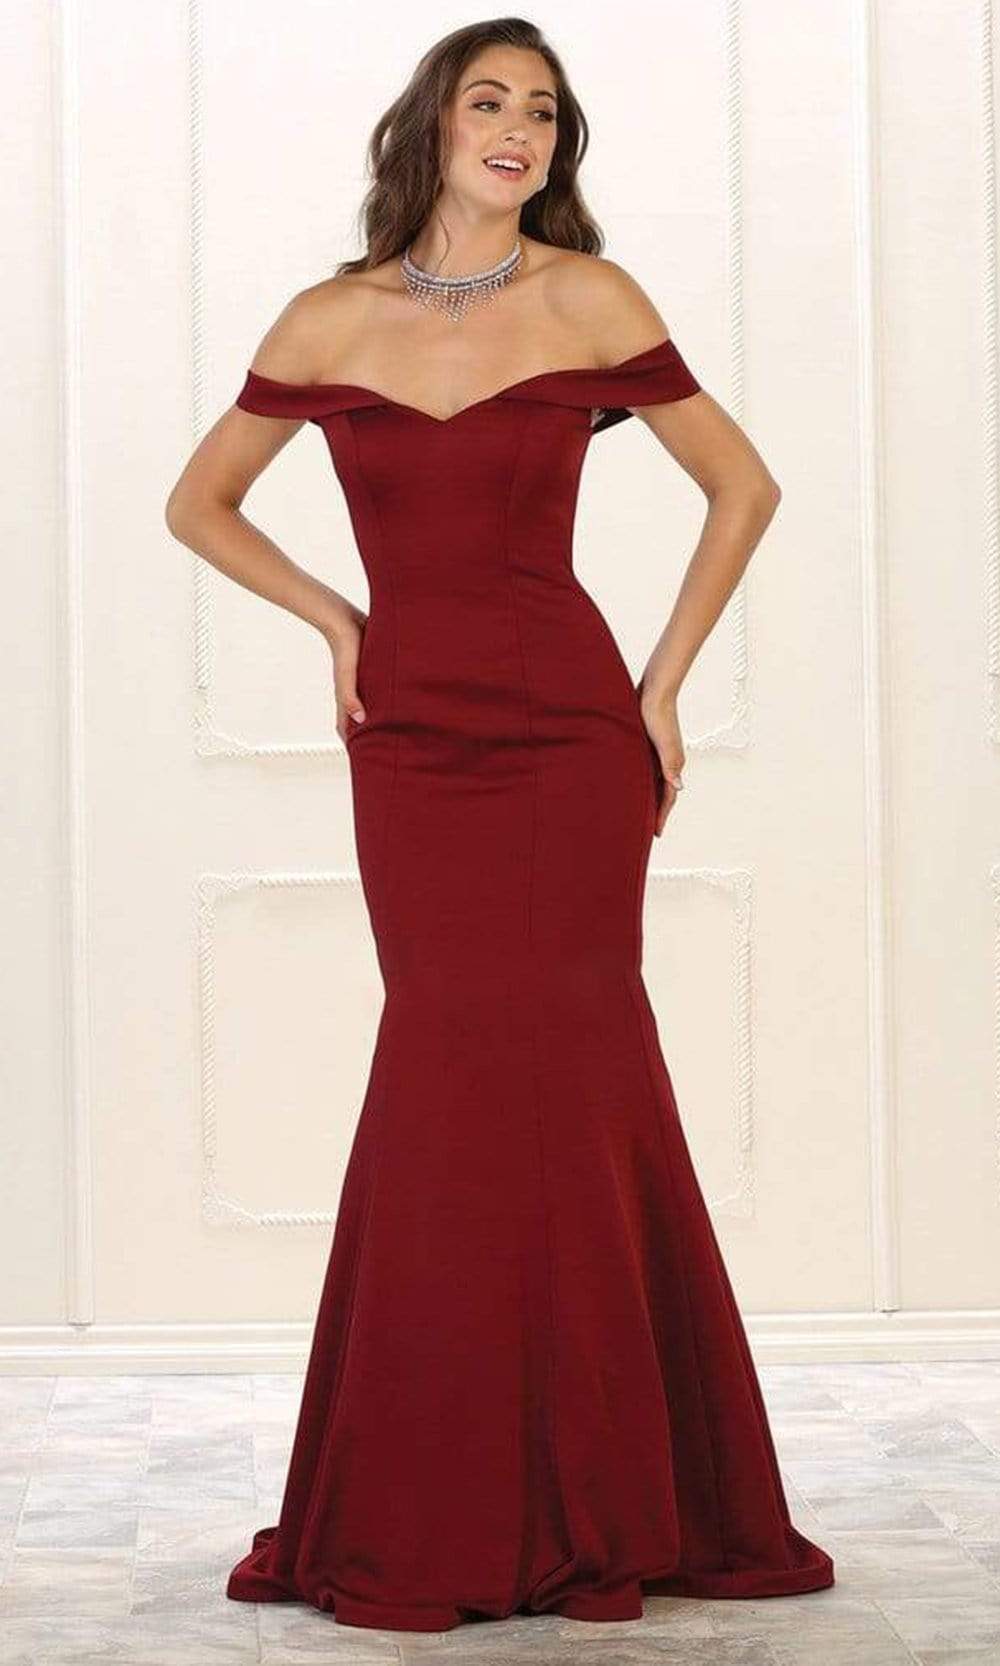 May Queen - MQ1547 Off Shoulder Mermaid Evening Gown Bridesmaid Dresses 2 / Burgundy